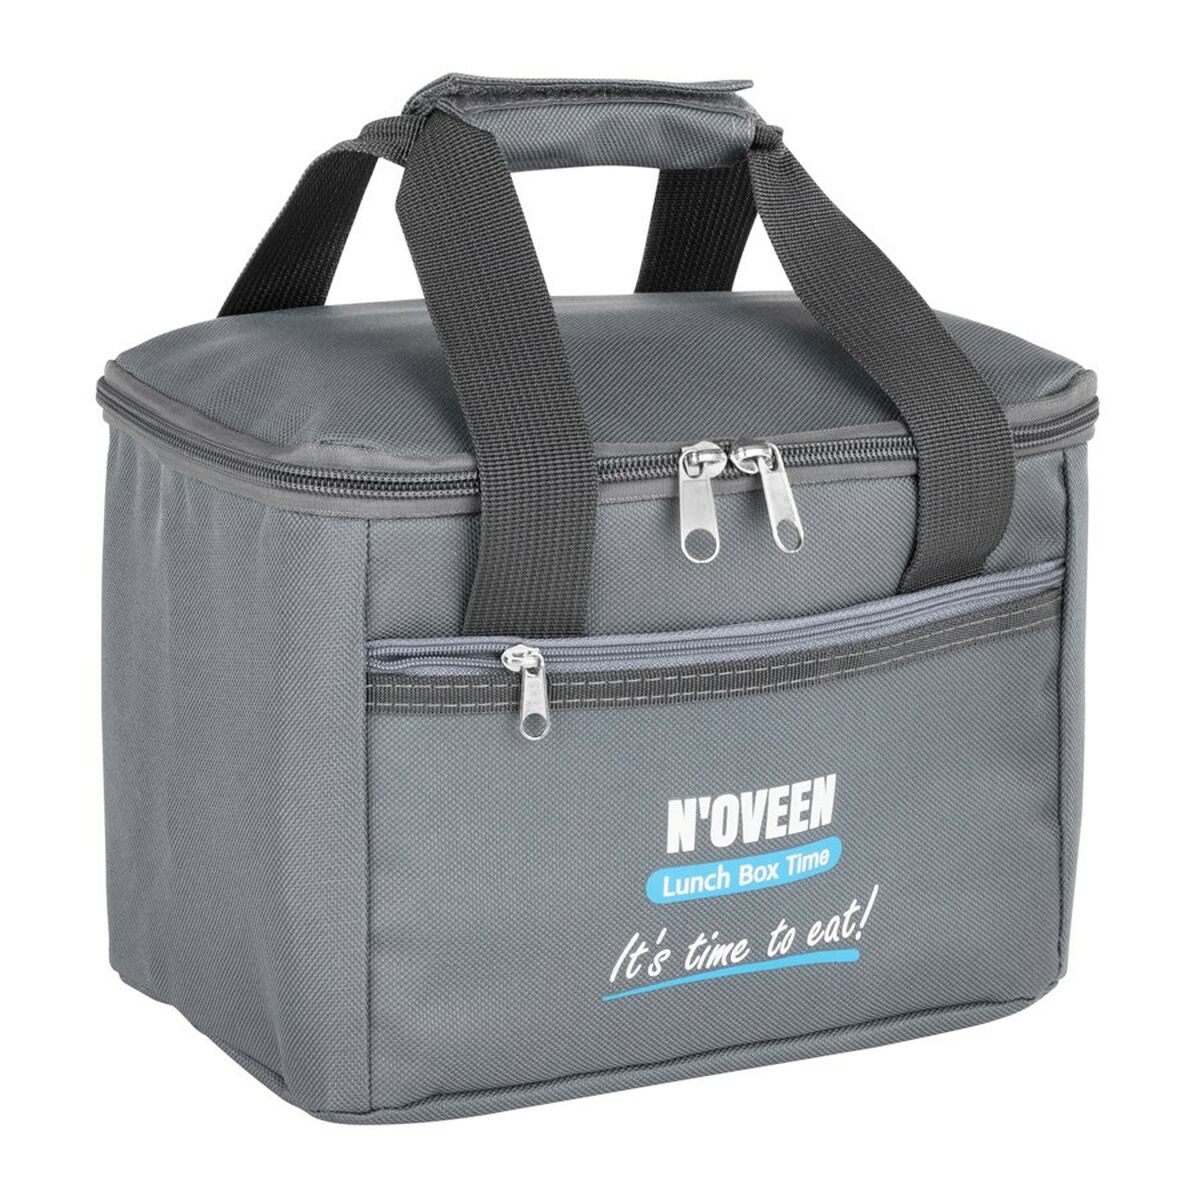 Electric Lunch Box N'oveen LB430 Blue